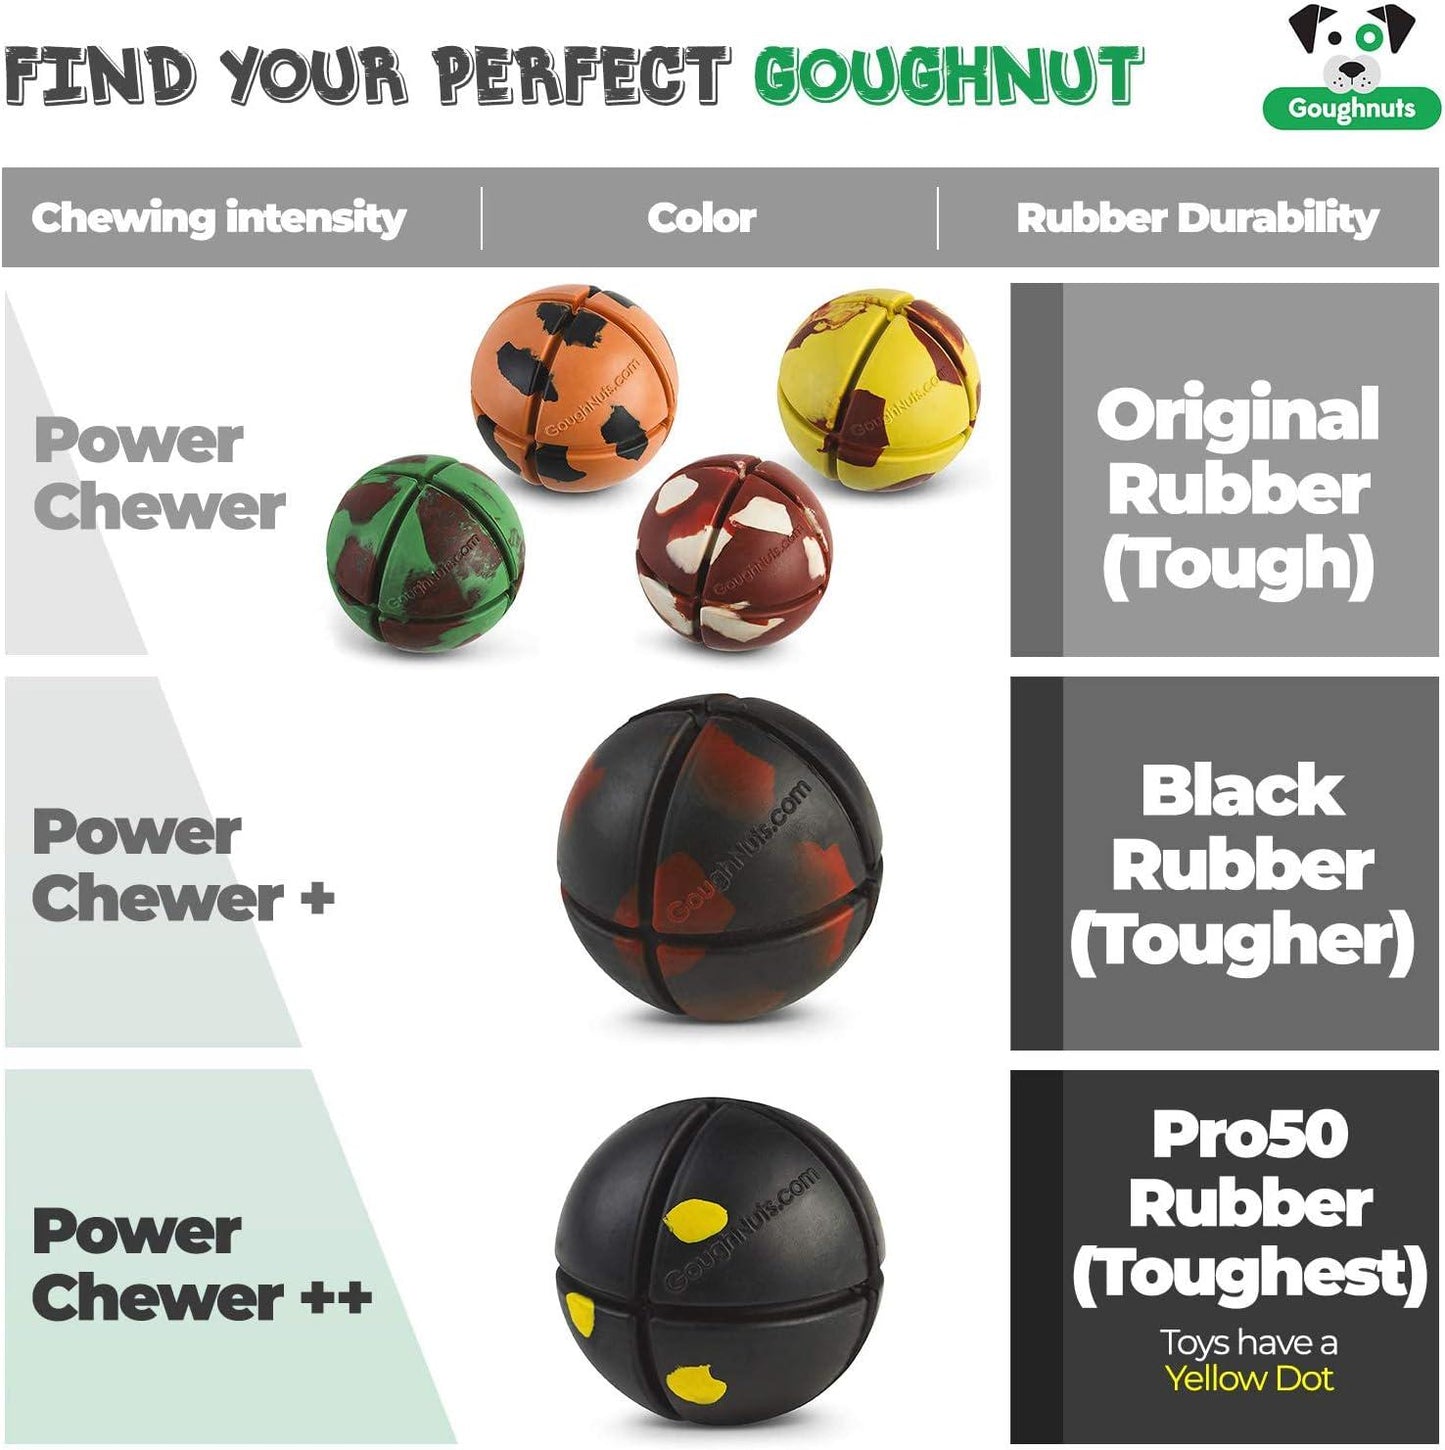 Virtually Indestructible Ball - Guaranteed Dog Chew Toys for Aggressive Chewers Like Pit Bulls, German Shepherds, and Labs from 30-70 Pounds